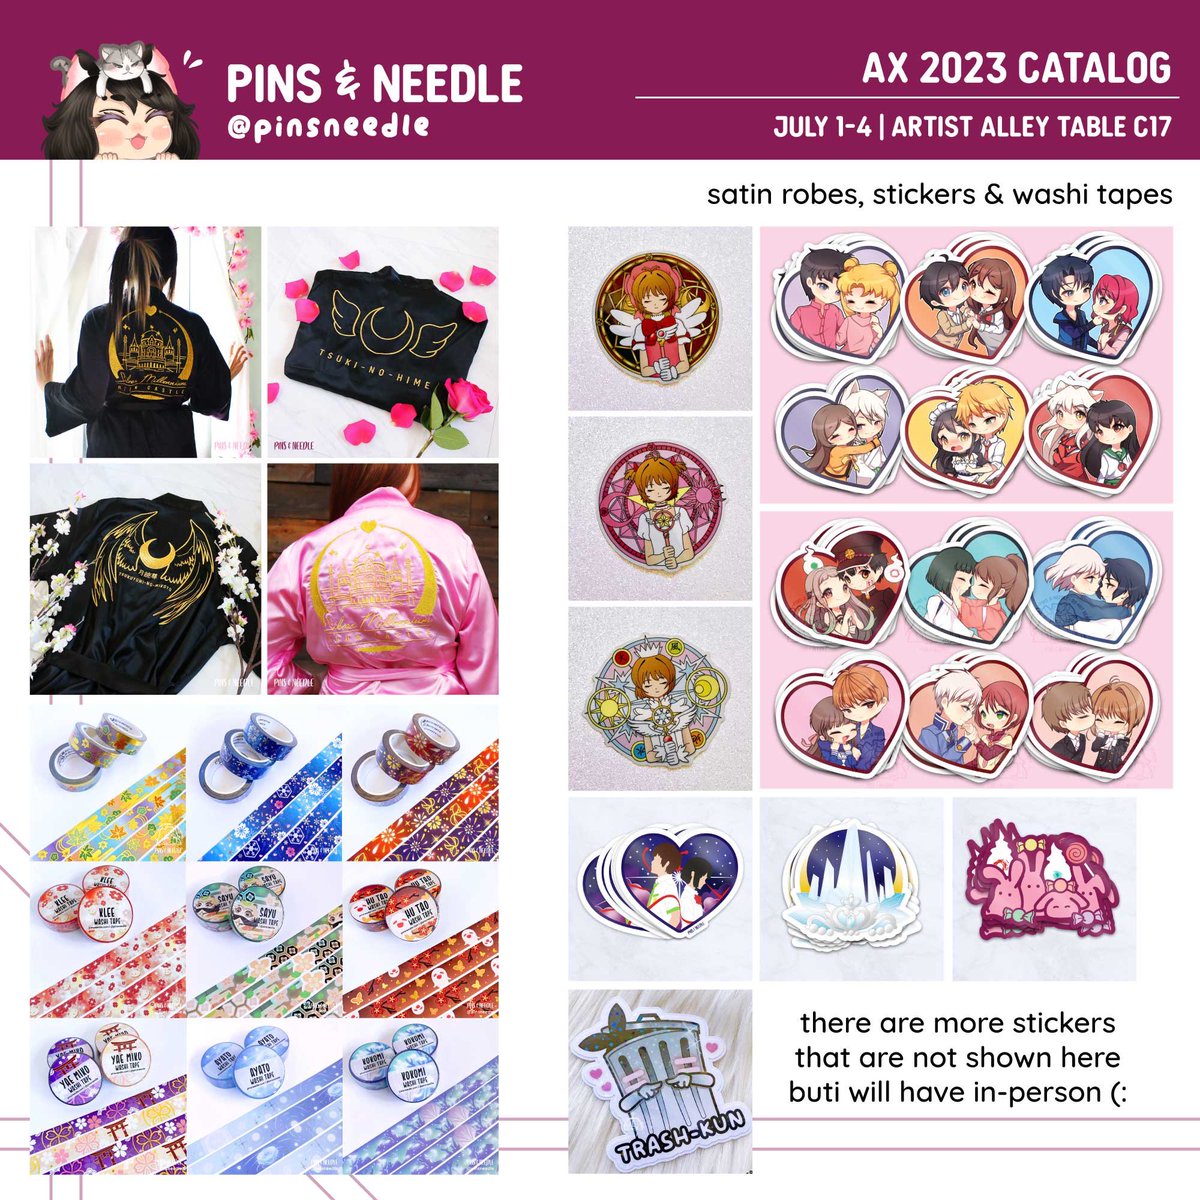 I'll be at AX! I'll be in the artist alley, table c17! Here's my catalog! Not all my stickers are shown and I have 3 new pins releasing at AX! 

#animeExpo2023 #AX2023 #axartistalley